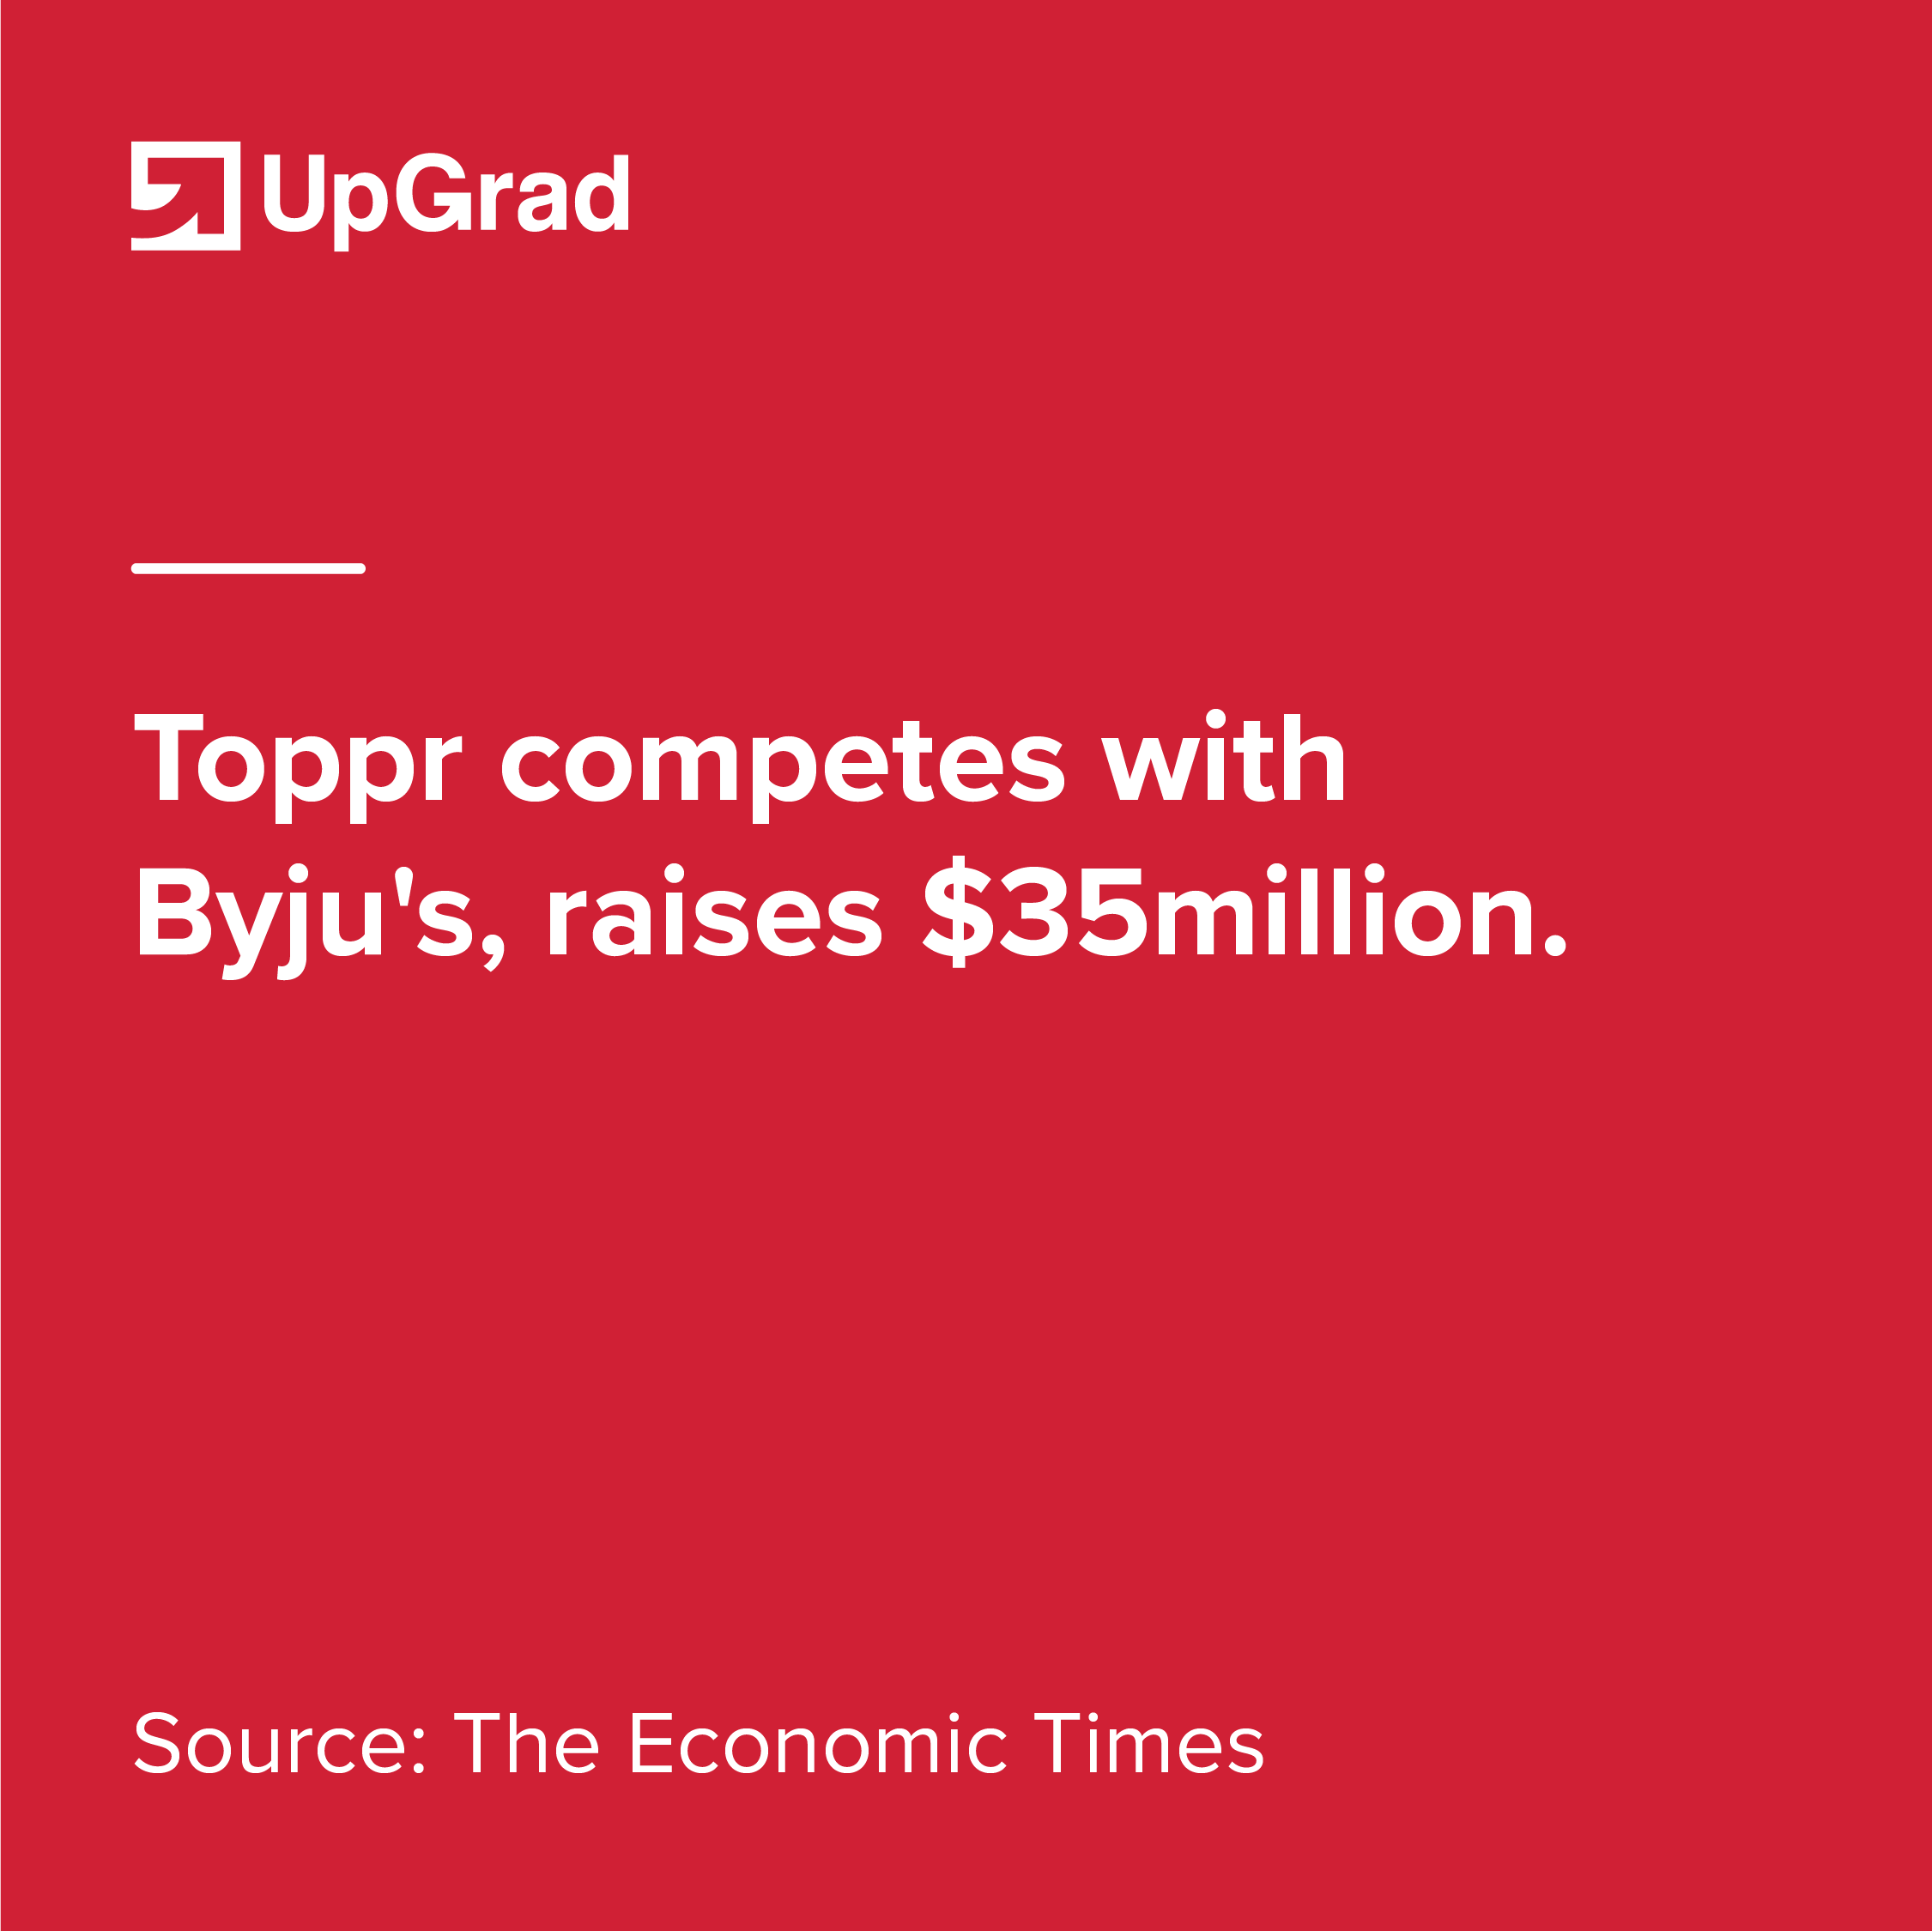 Toppr competes with Byju's